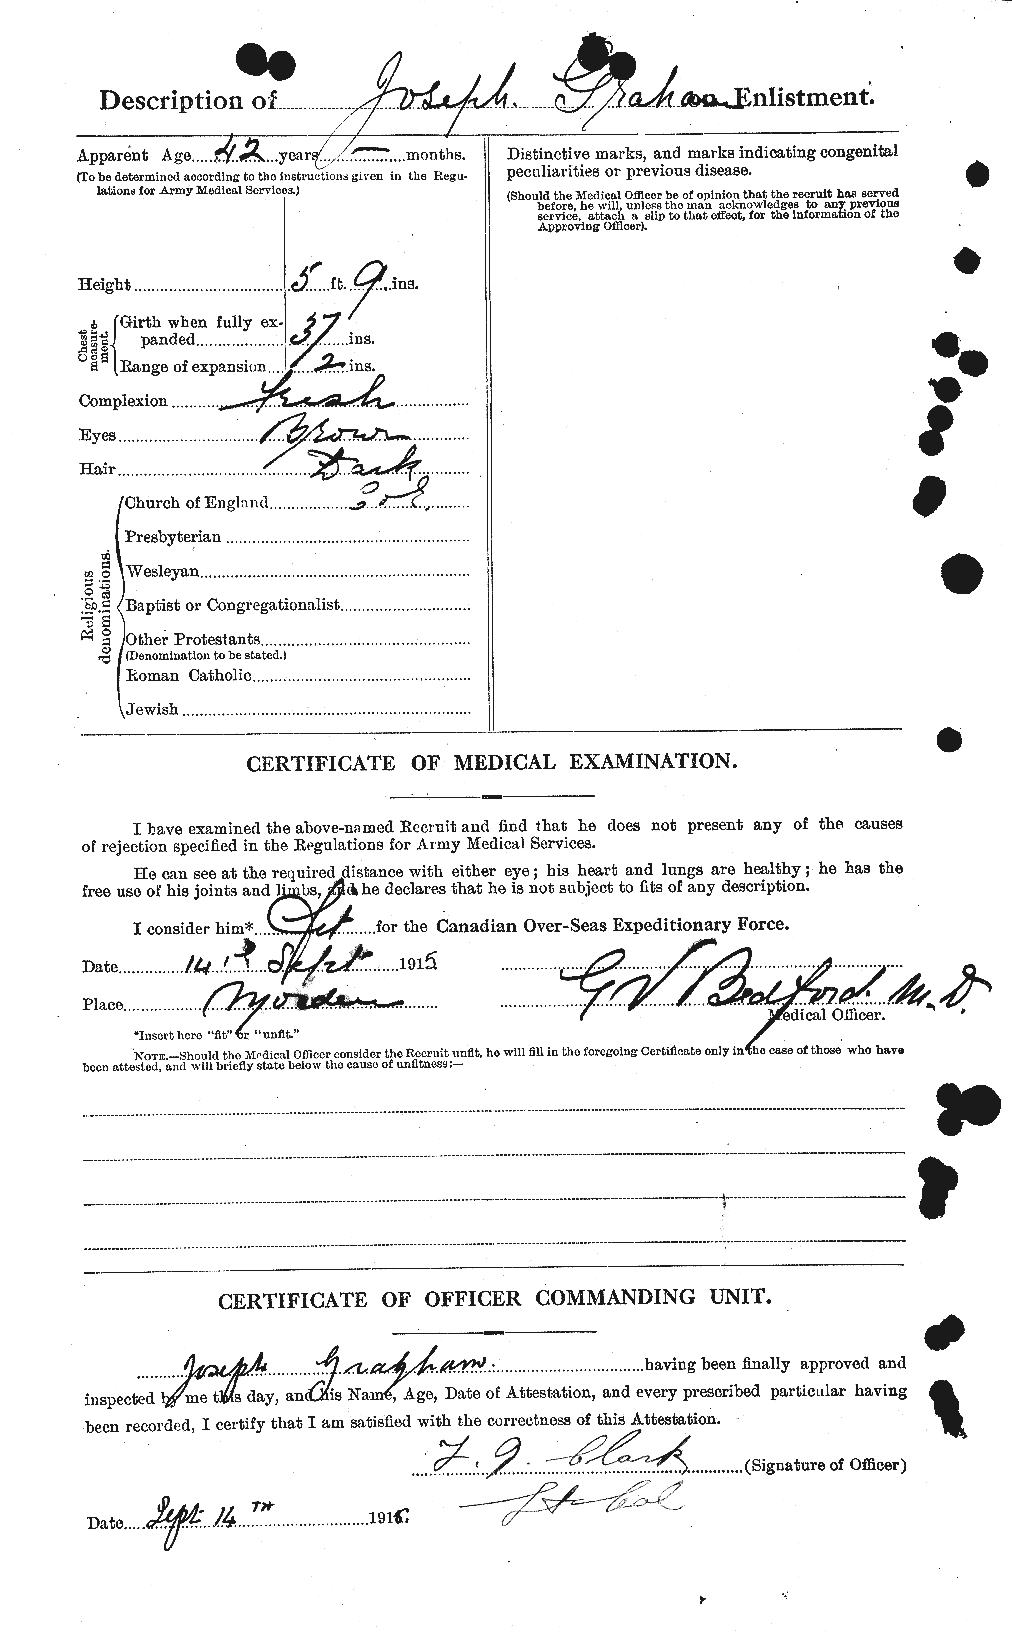 Personnel Records of the First World War - CEF 359233b